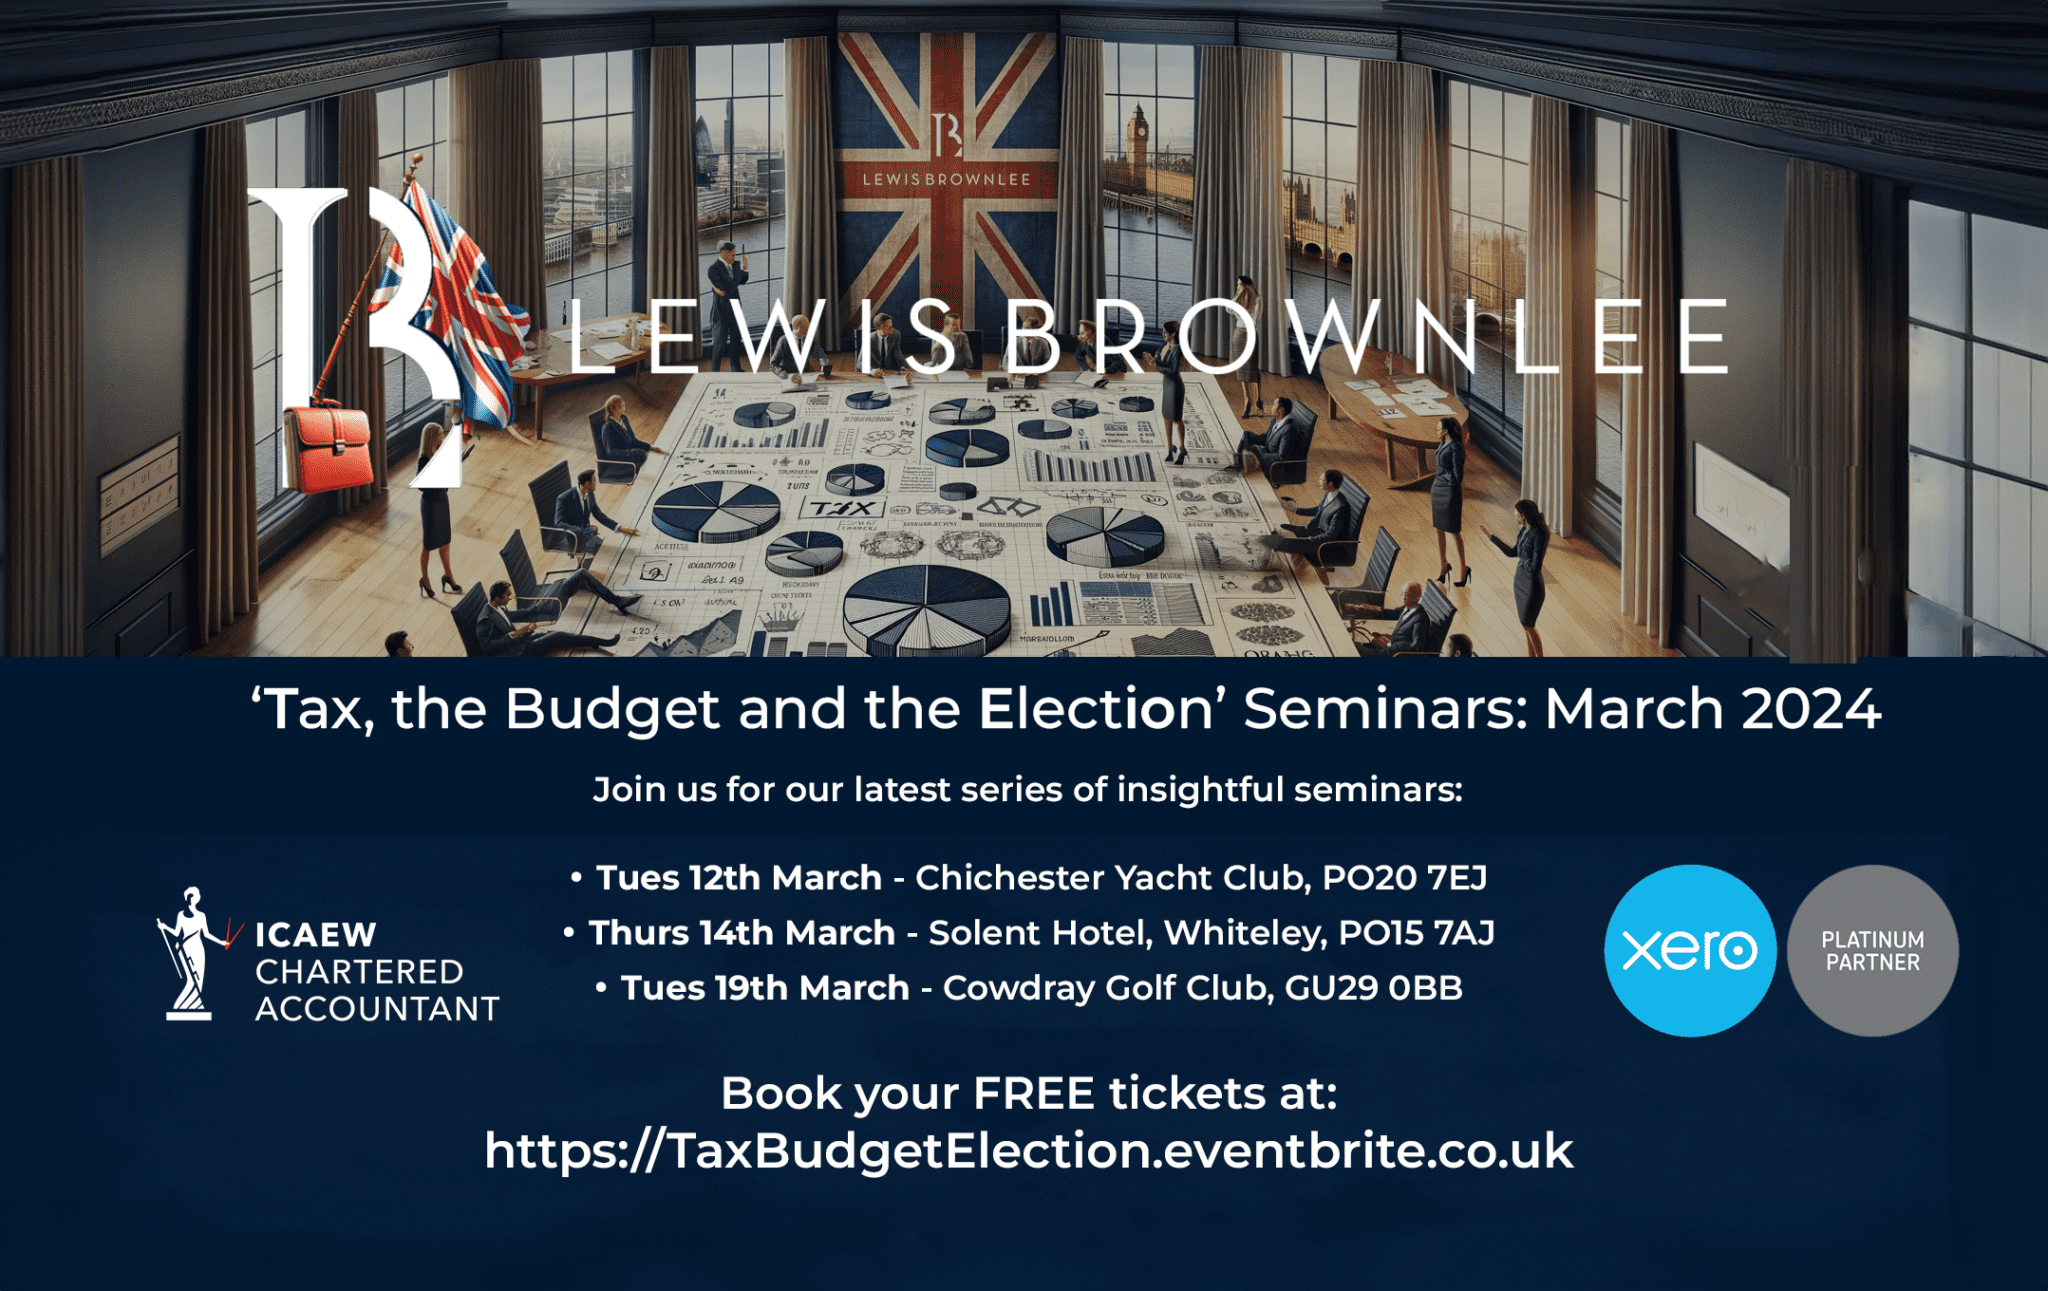 Tax, the Budget and the Election March 2024 Seminars